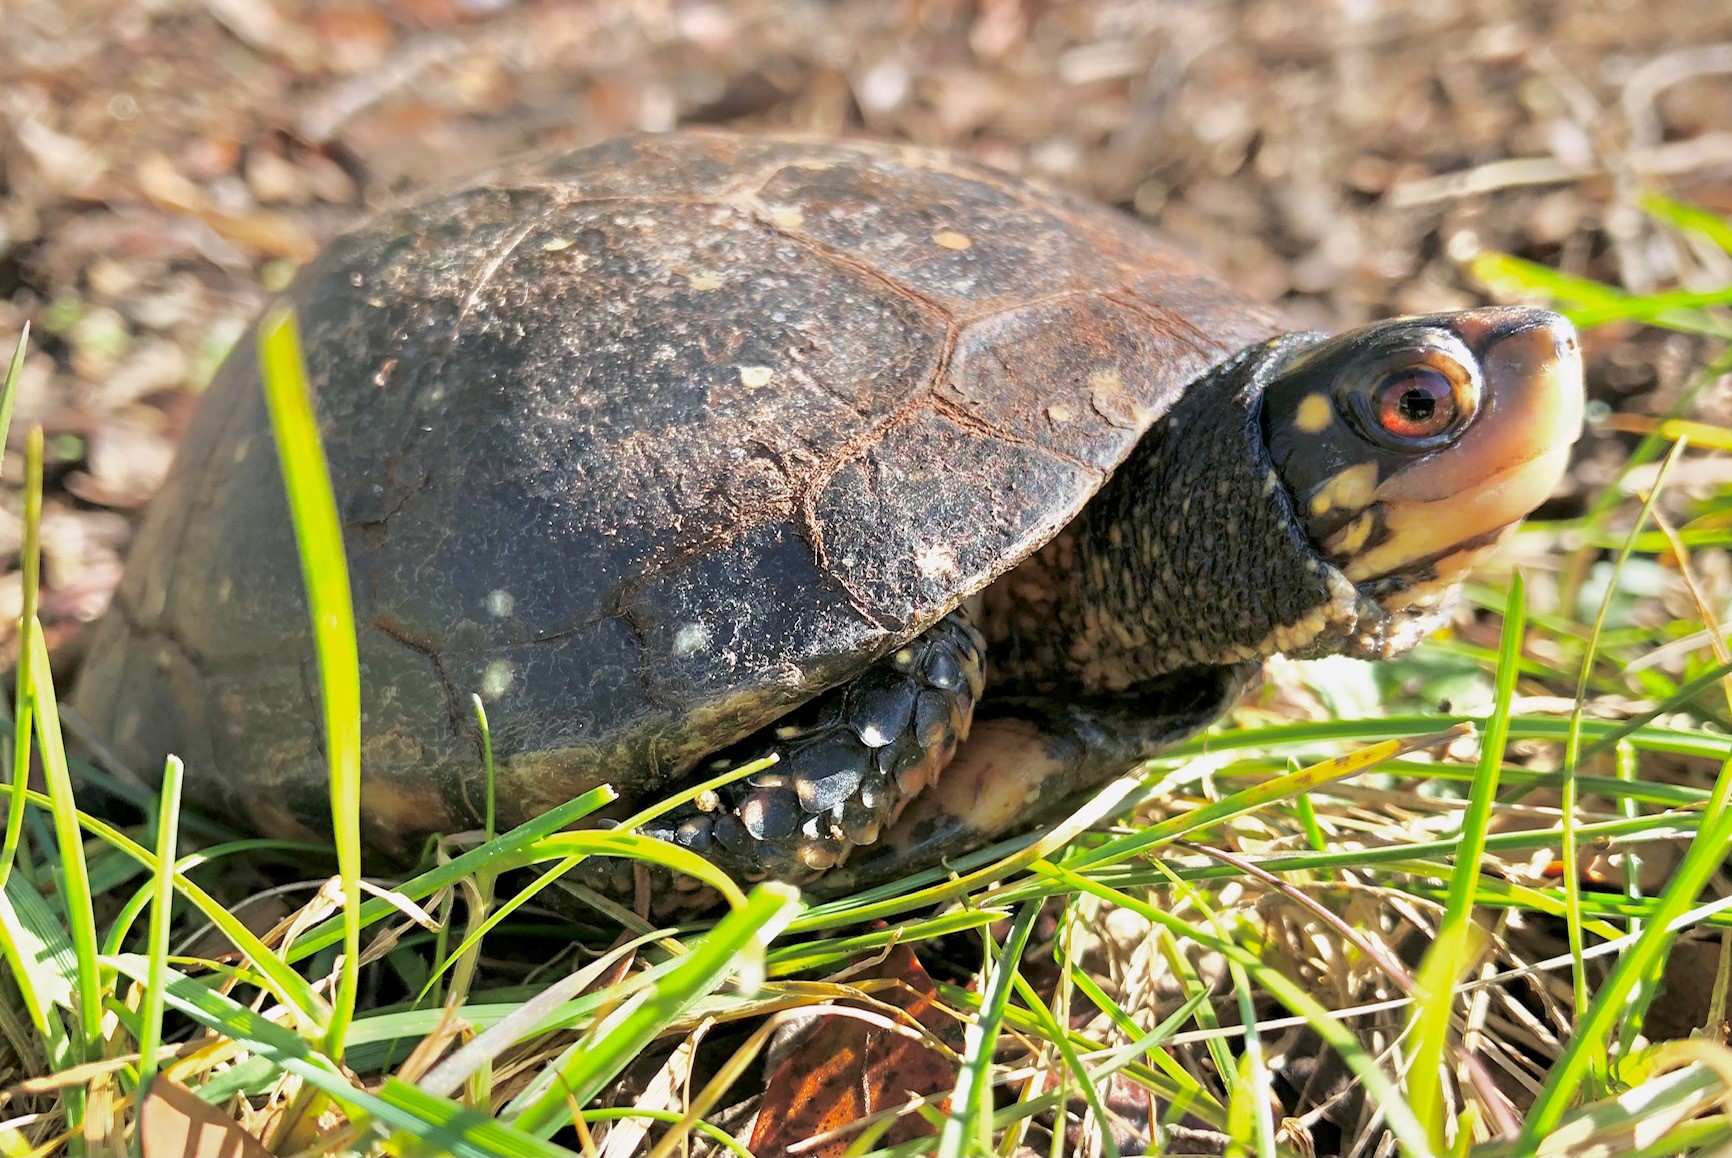 A small and brown turtle looks up and to left while in a patch of grass; it is a spotted turtle named Dottie.